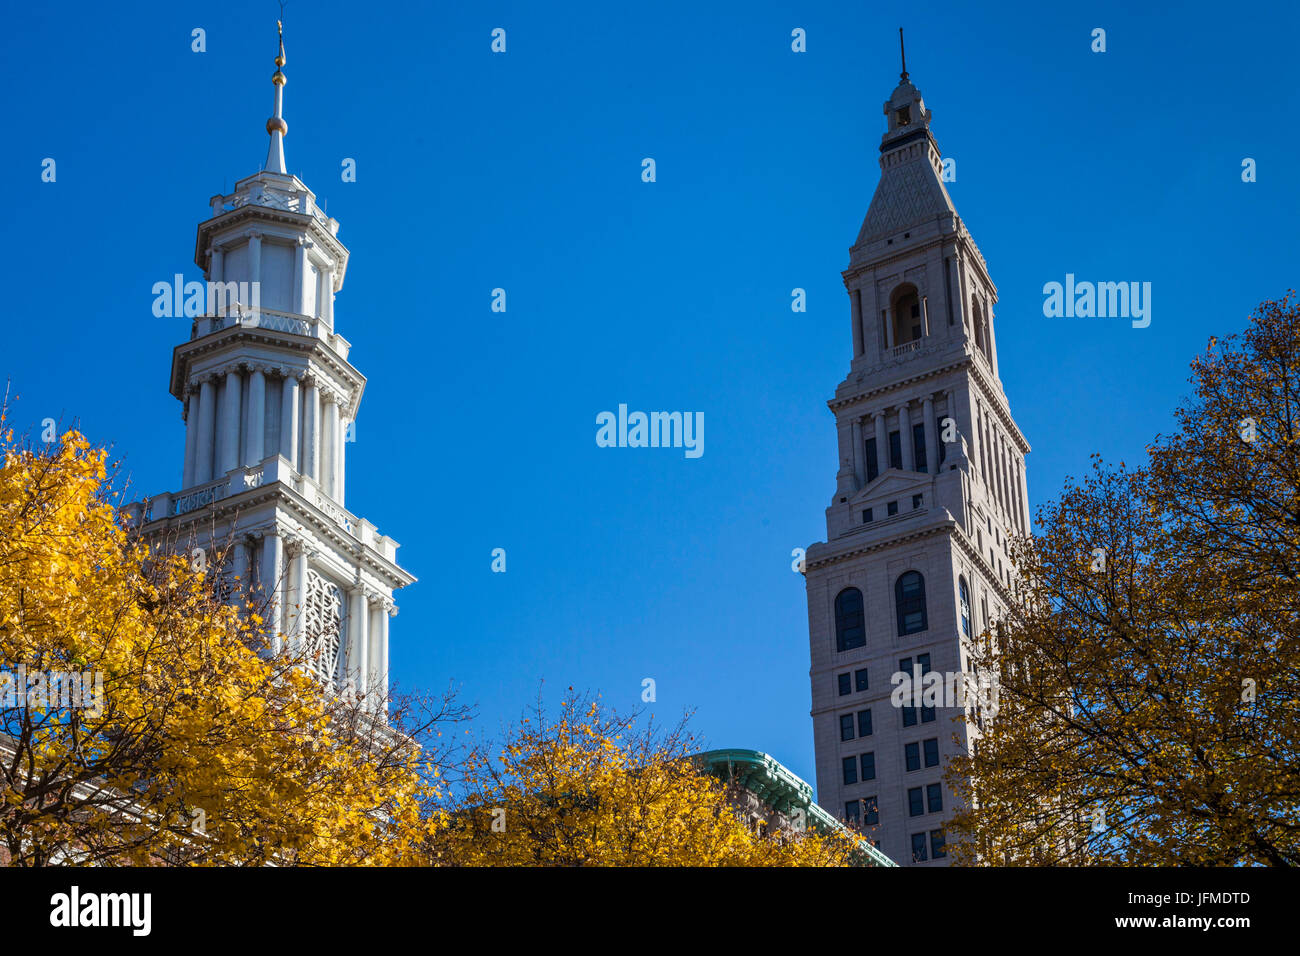 USA, Connecticut, Hartford, Travelers Tower, headquarters of the Travelers Insurance Company, autumn Stock Photo